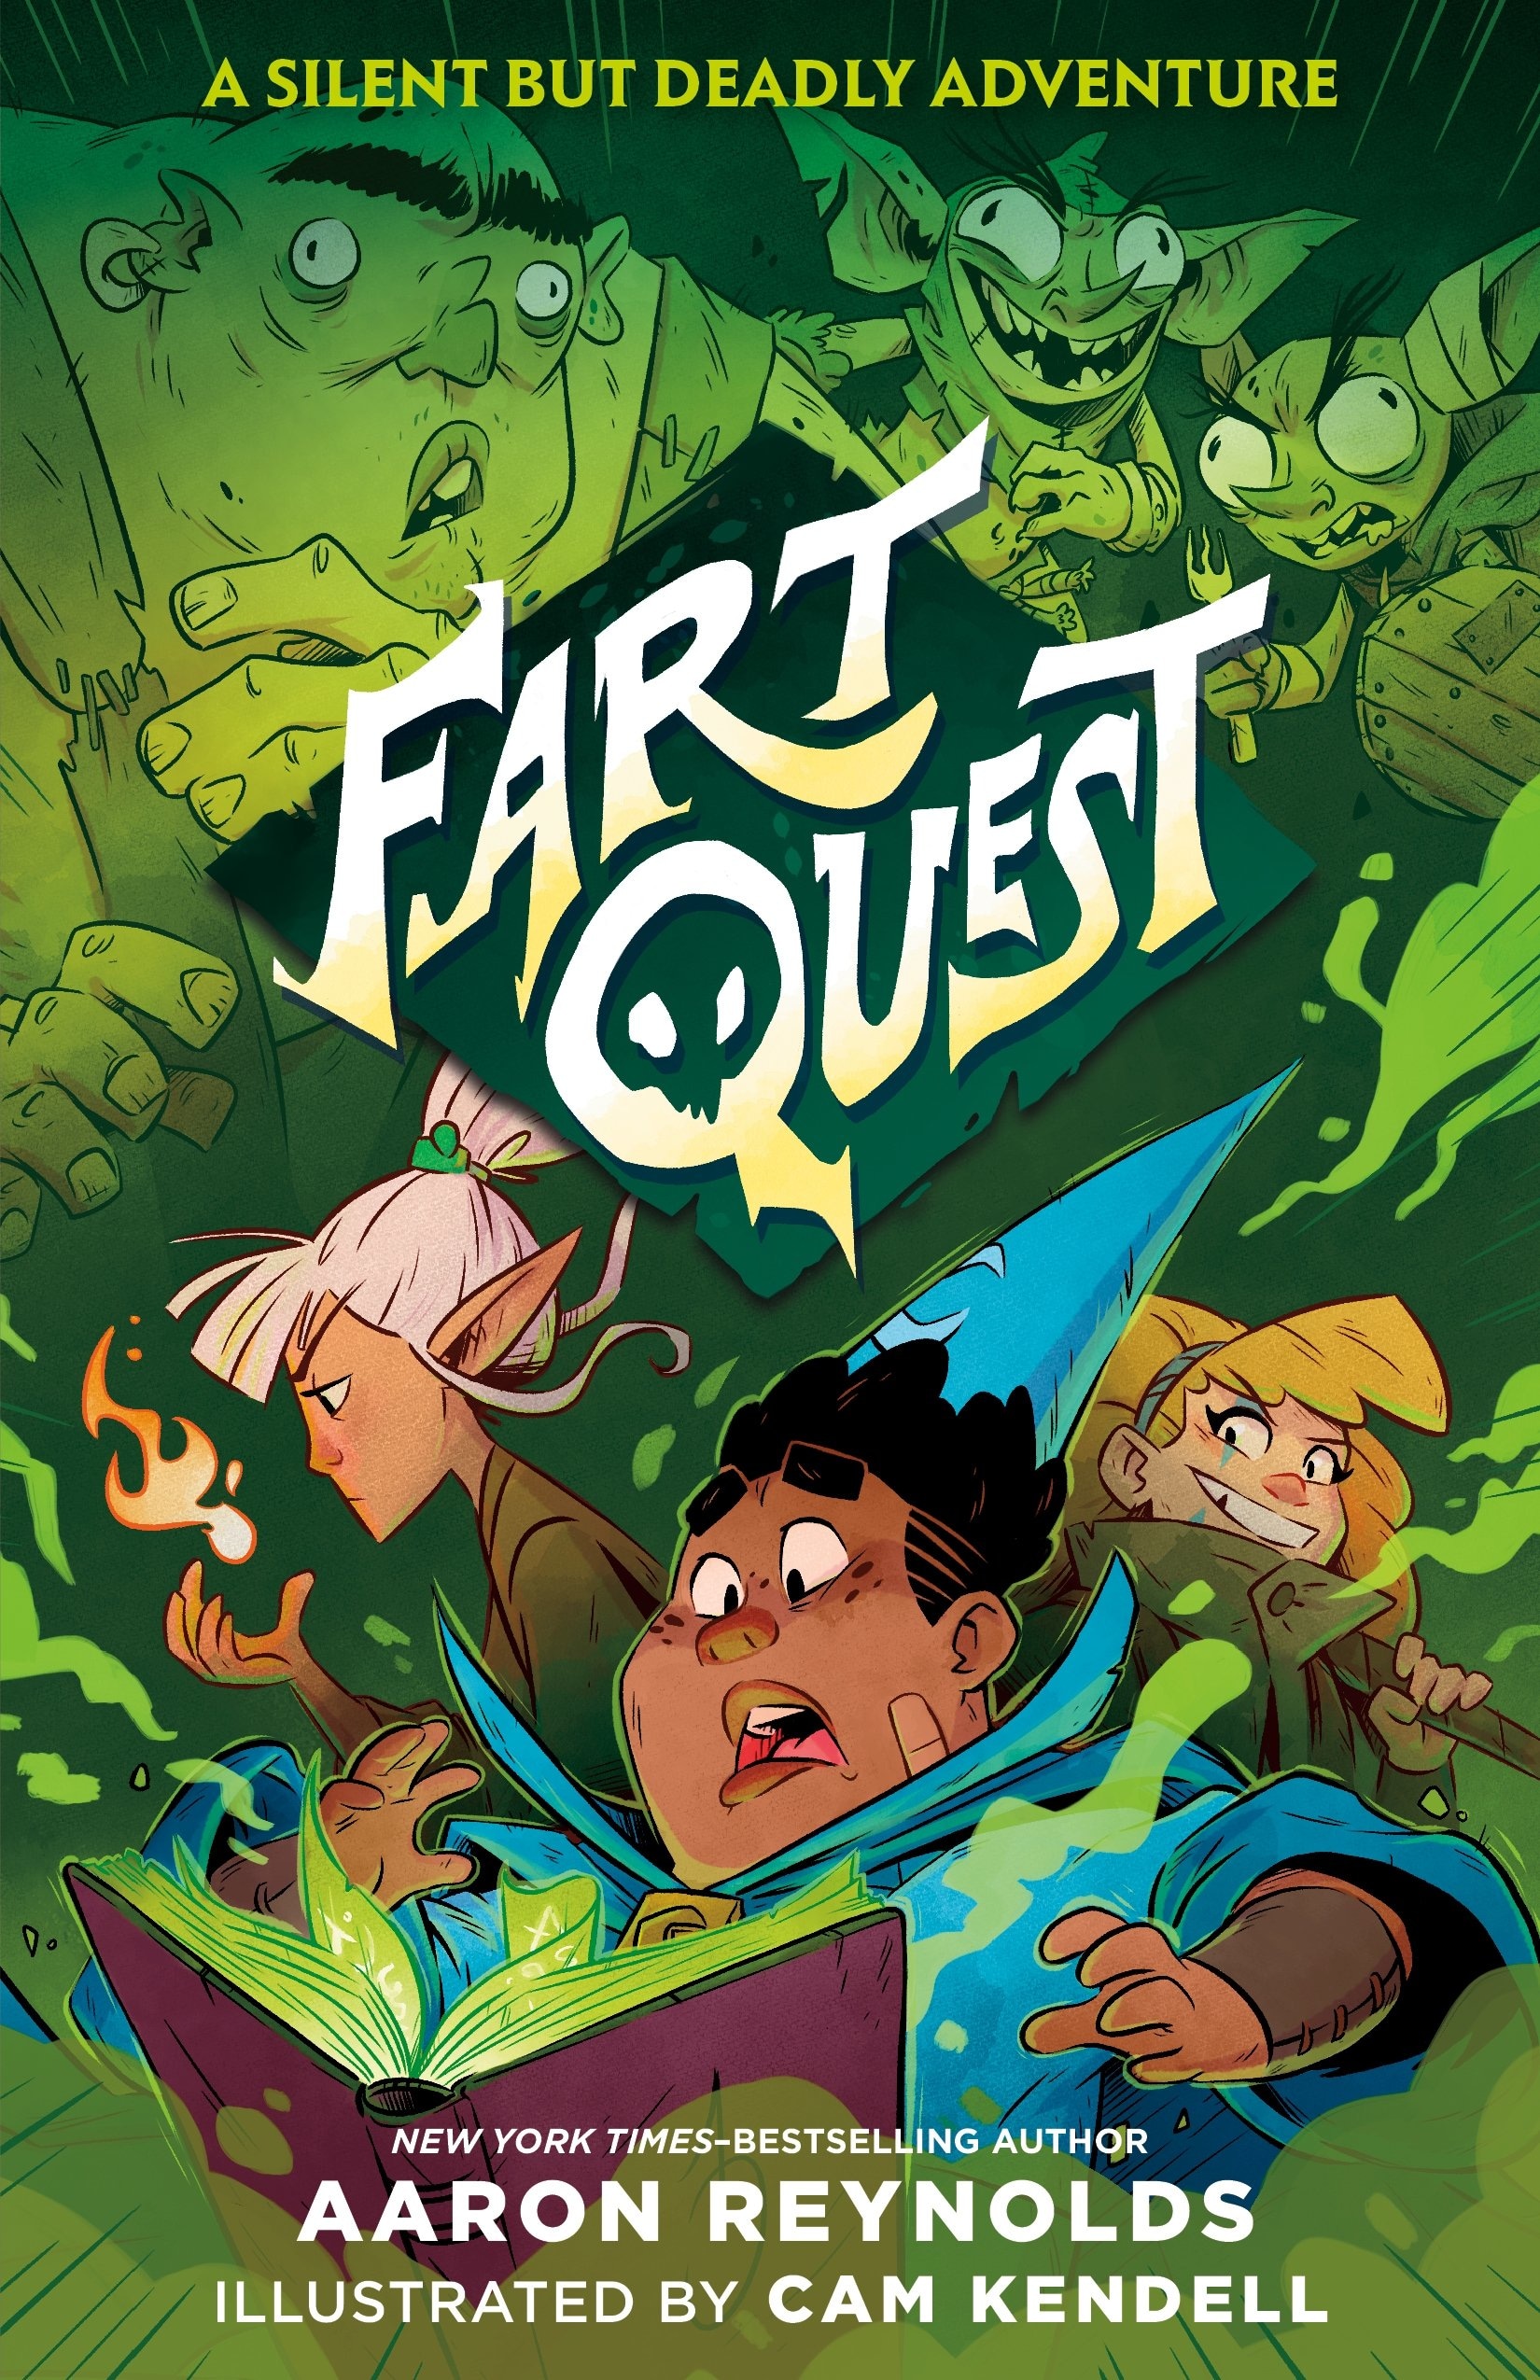 Book “Fart Quest” by Aaron Reynolds — September 15, 2020